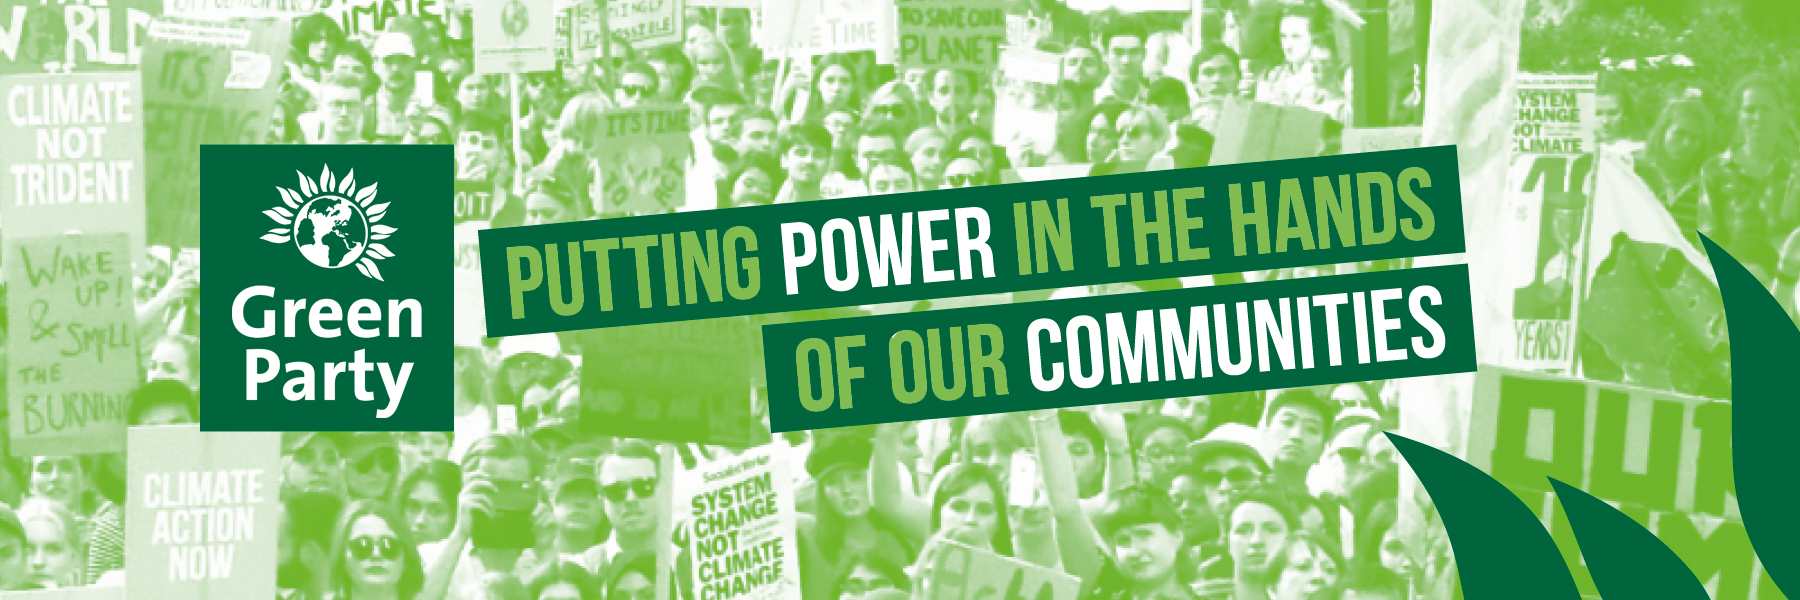 putting power in the hands of our communities